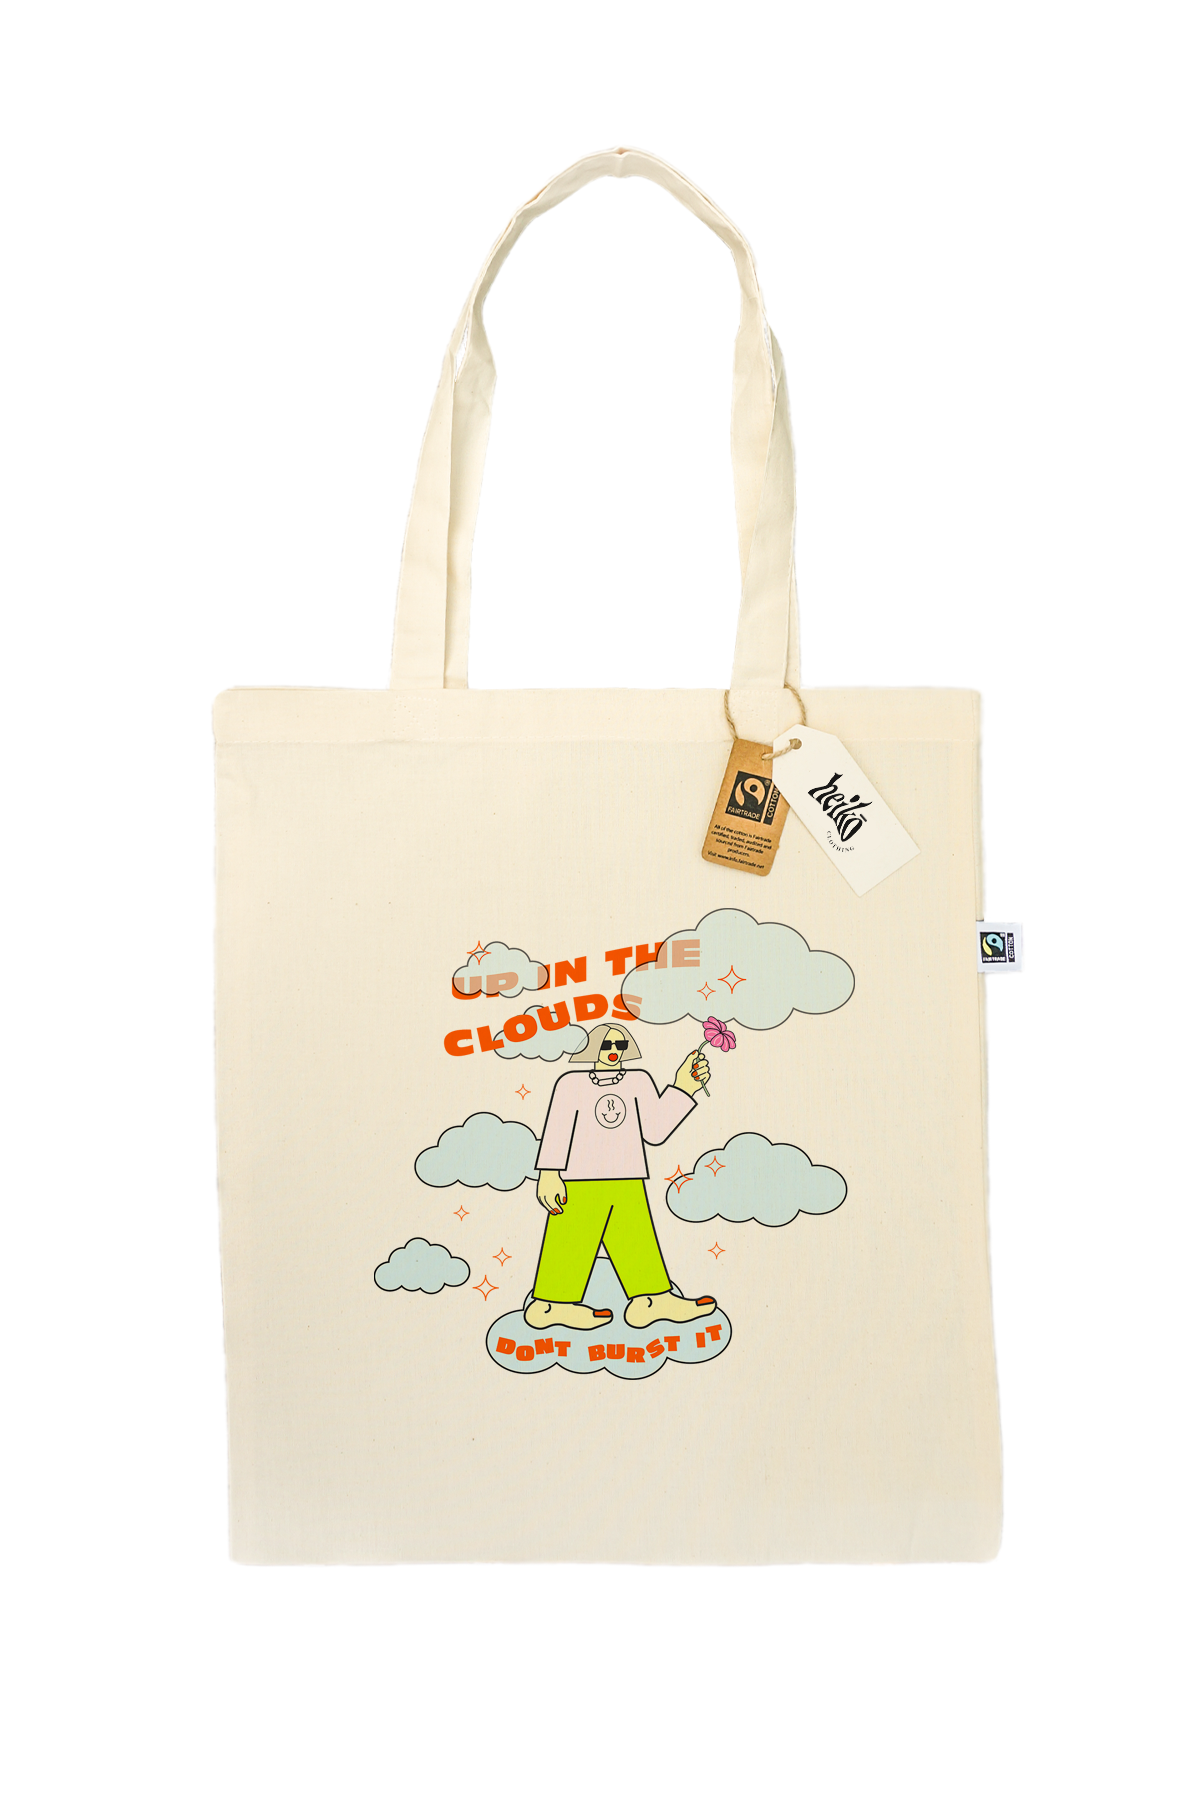 Up In The Clouds Tote Bag - Vegan - 100% Organic Cotton